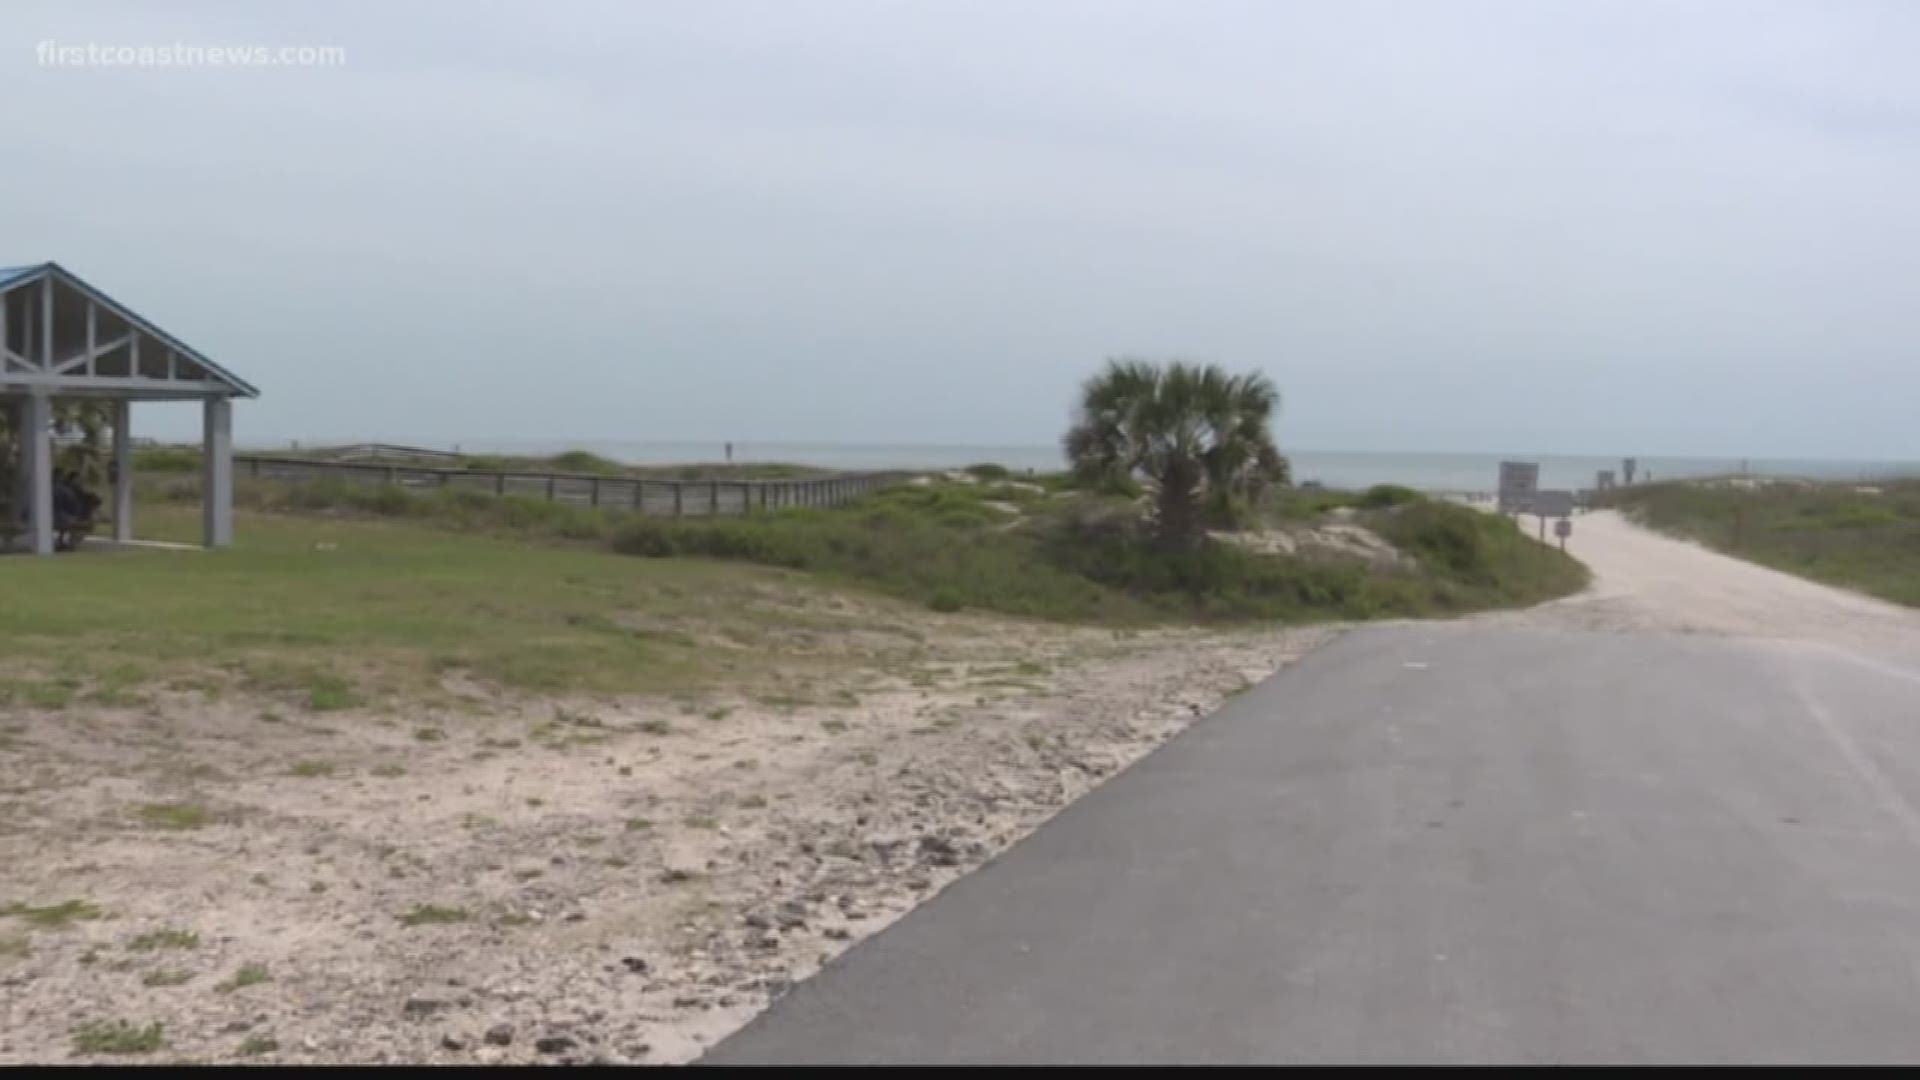 A second hit-and-run incident was reported in Fernandina Beach within the past month. The most recent one occurred Tuesday when a woman was run over on Sadler Beach.